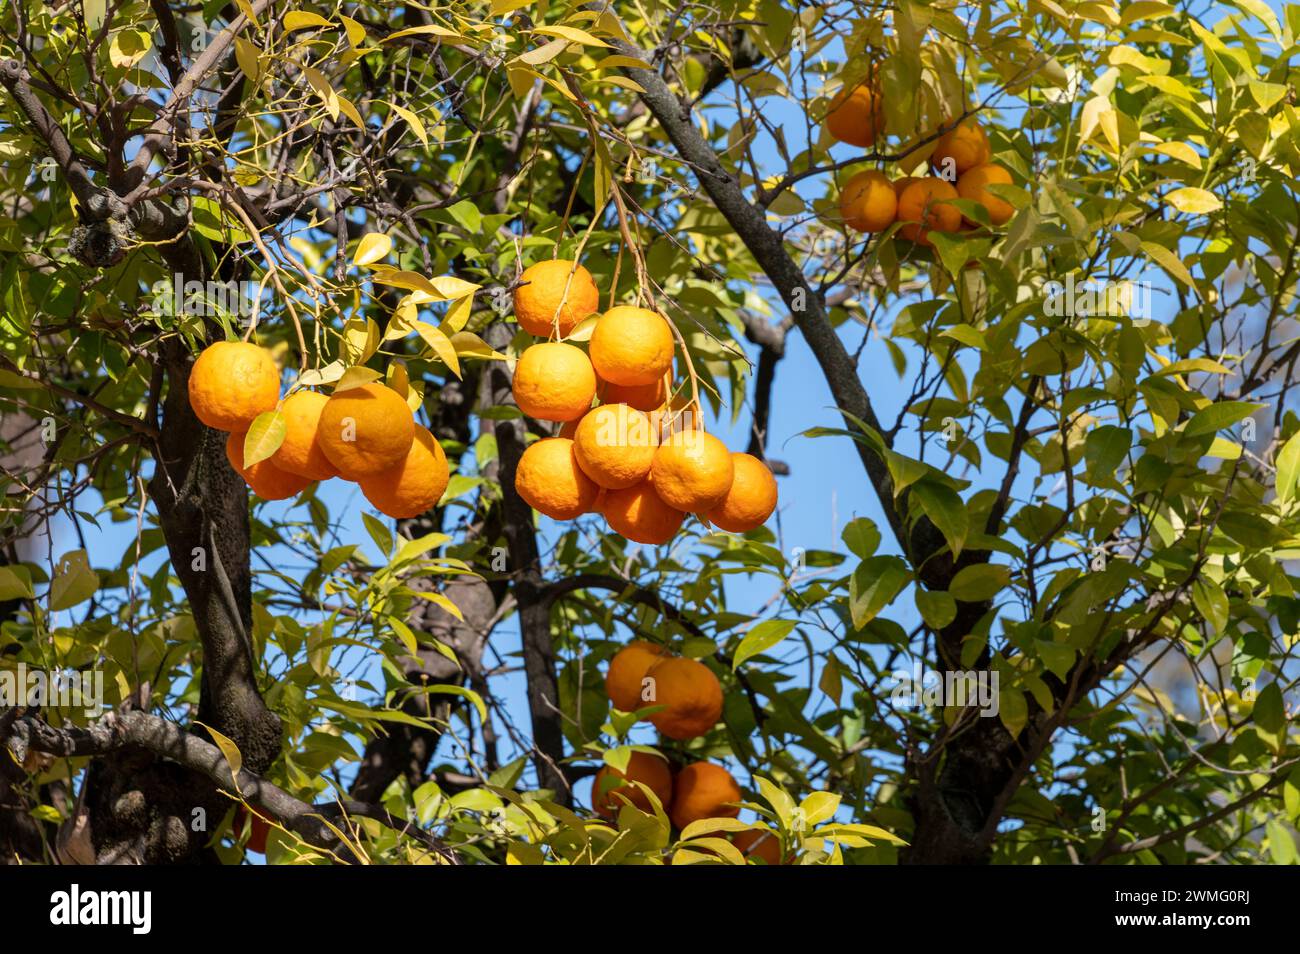 Small bitter oranges or Sevillian oranges with pitted skins, are grown in the streets around  Cordoba thus creating a pleasant air of orange aroma in Anda Stock Photo